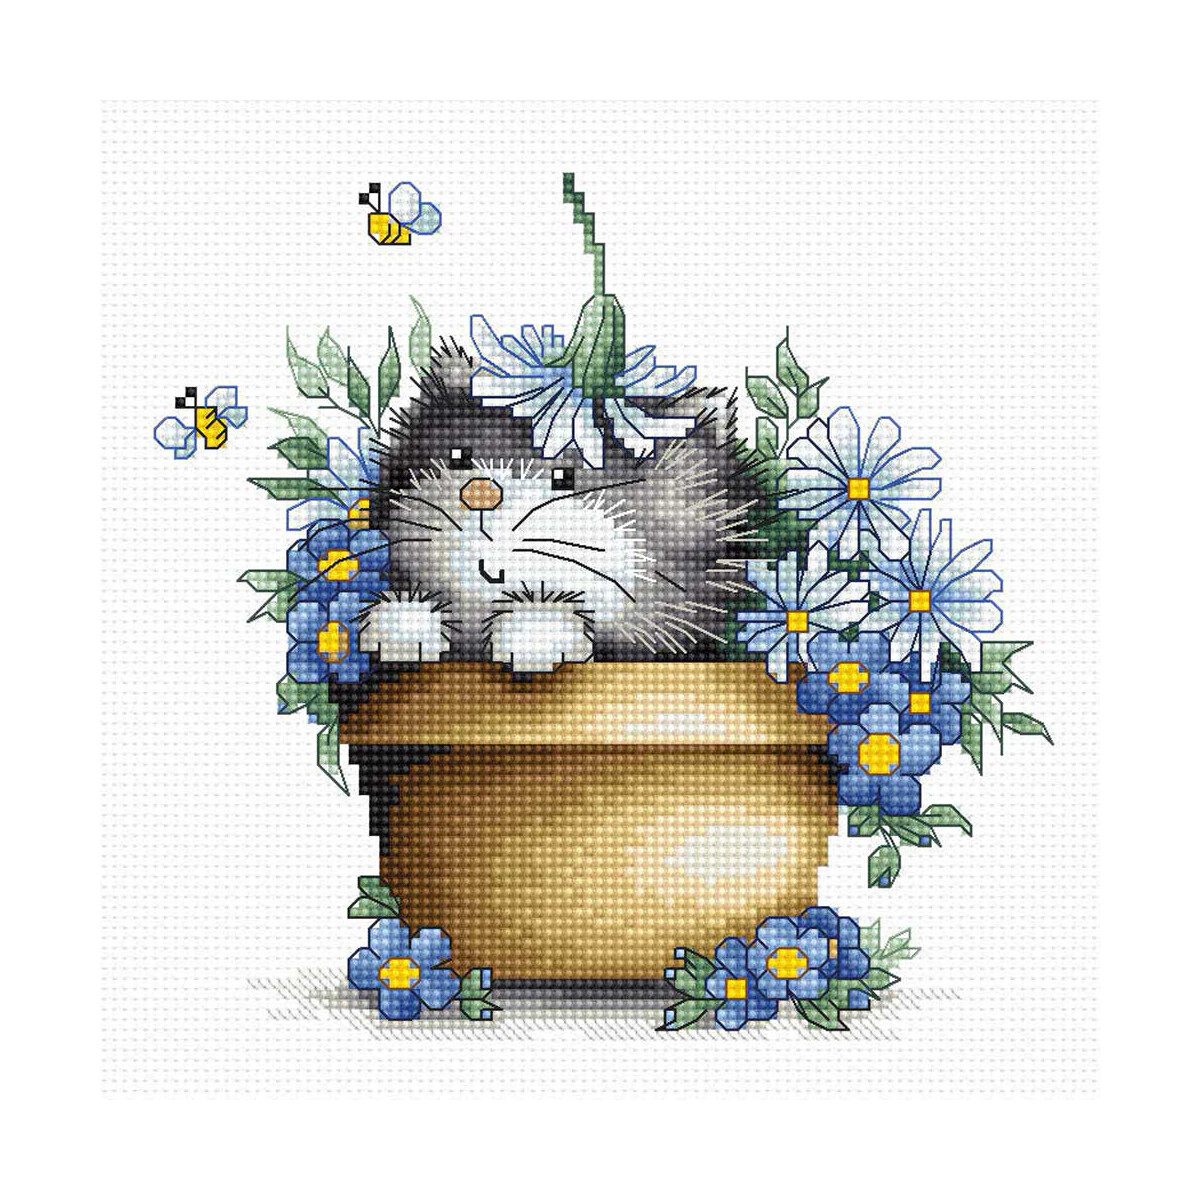 This embroidery kit from Luca-s features an adorable...